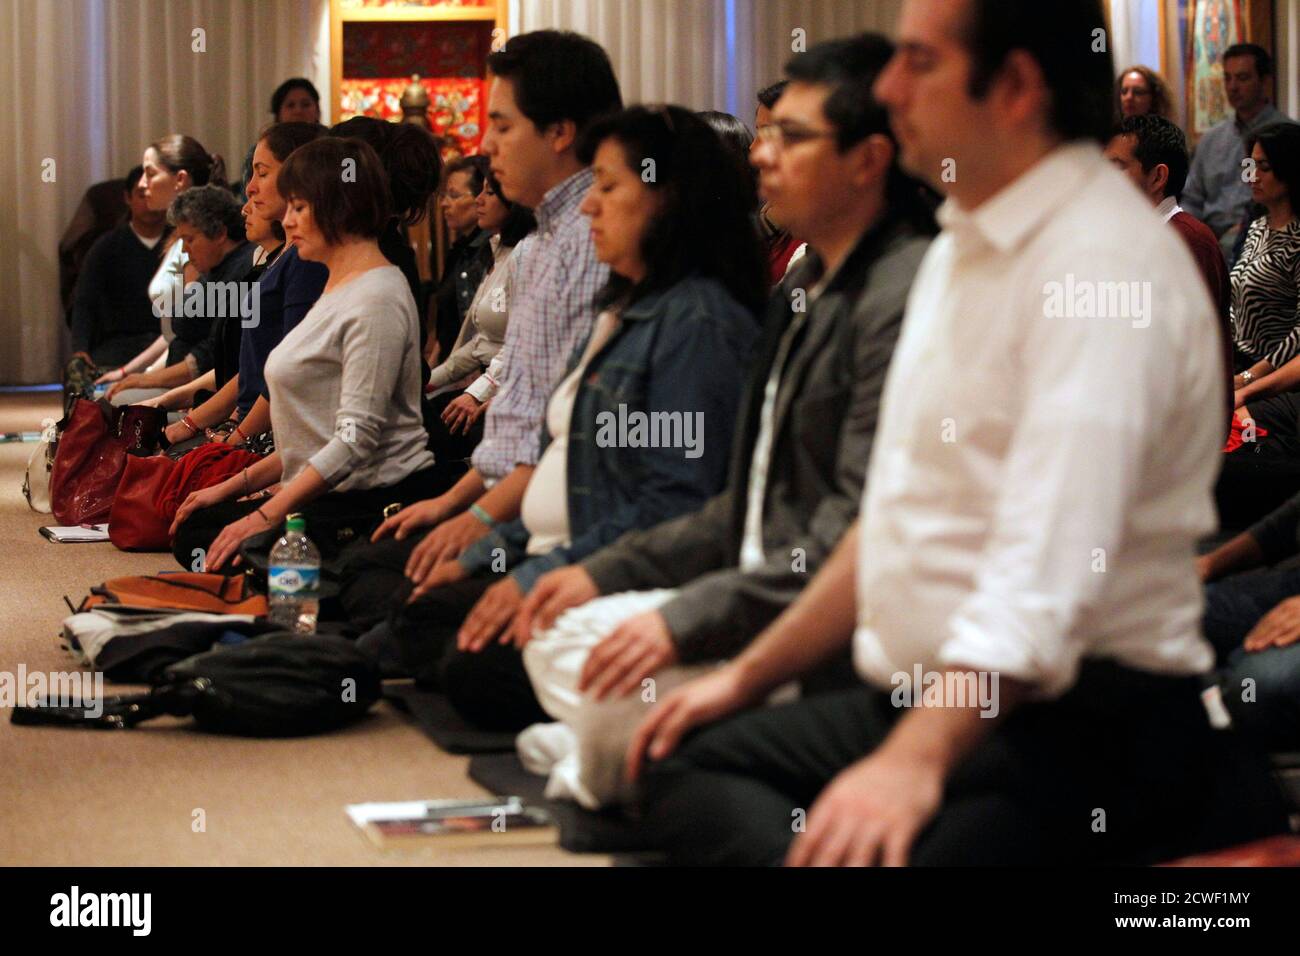 Mexican students of Tibetan Buddhist culture meditate inside Tibet house in Mexico City, October 7, 2013. The Dalai Lama will visit Mexico from October 11 to 16. Picture taken October 7, 2013. REUTERS/Edgard Garrido (MEXICO - Tags: RELIGION ) Stock Photo